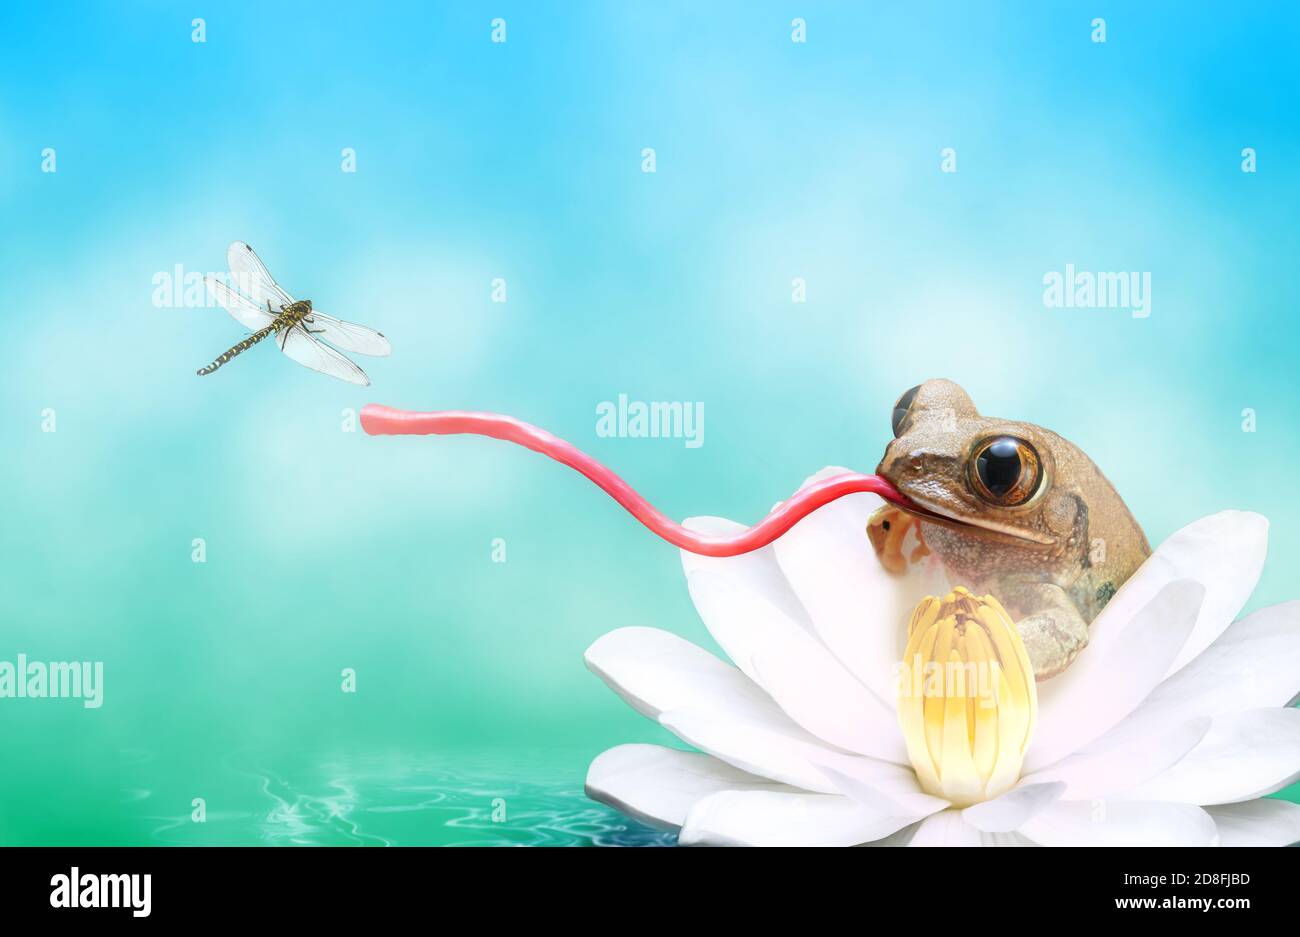 Frog with a long tongue catching dragonfly Stock Photo